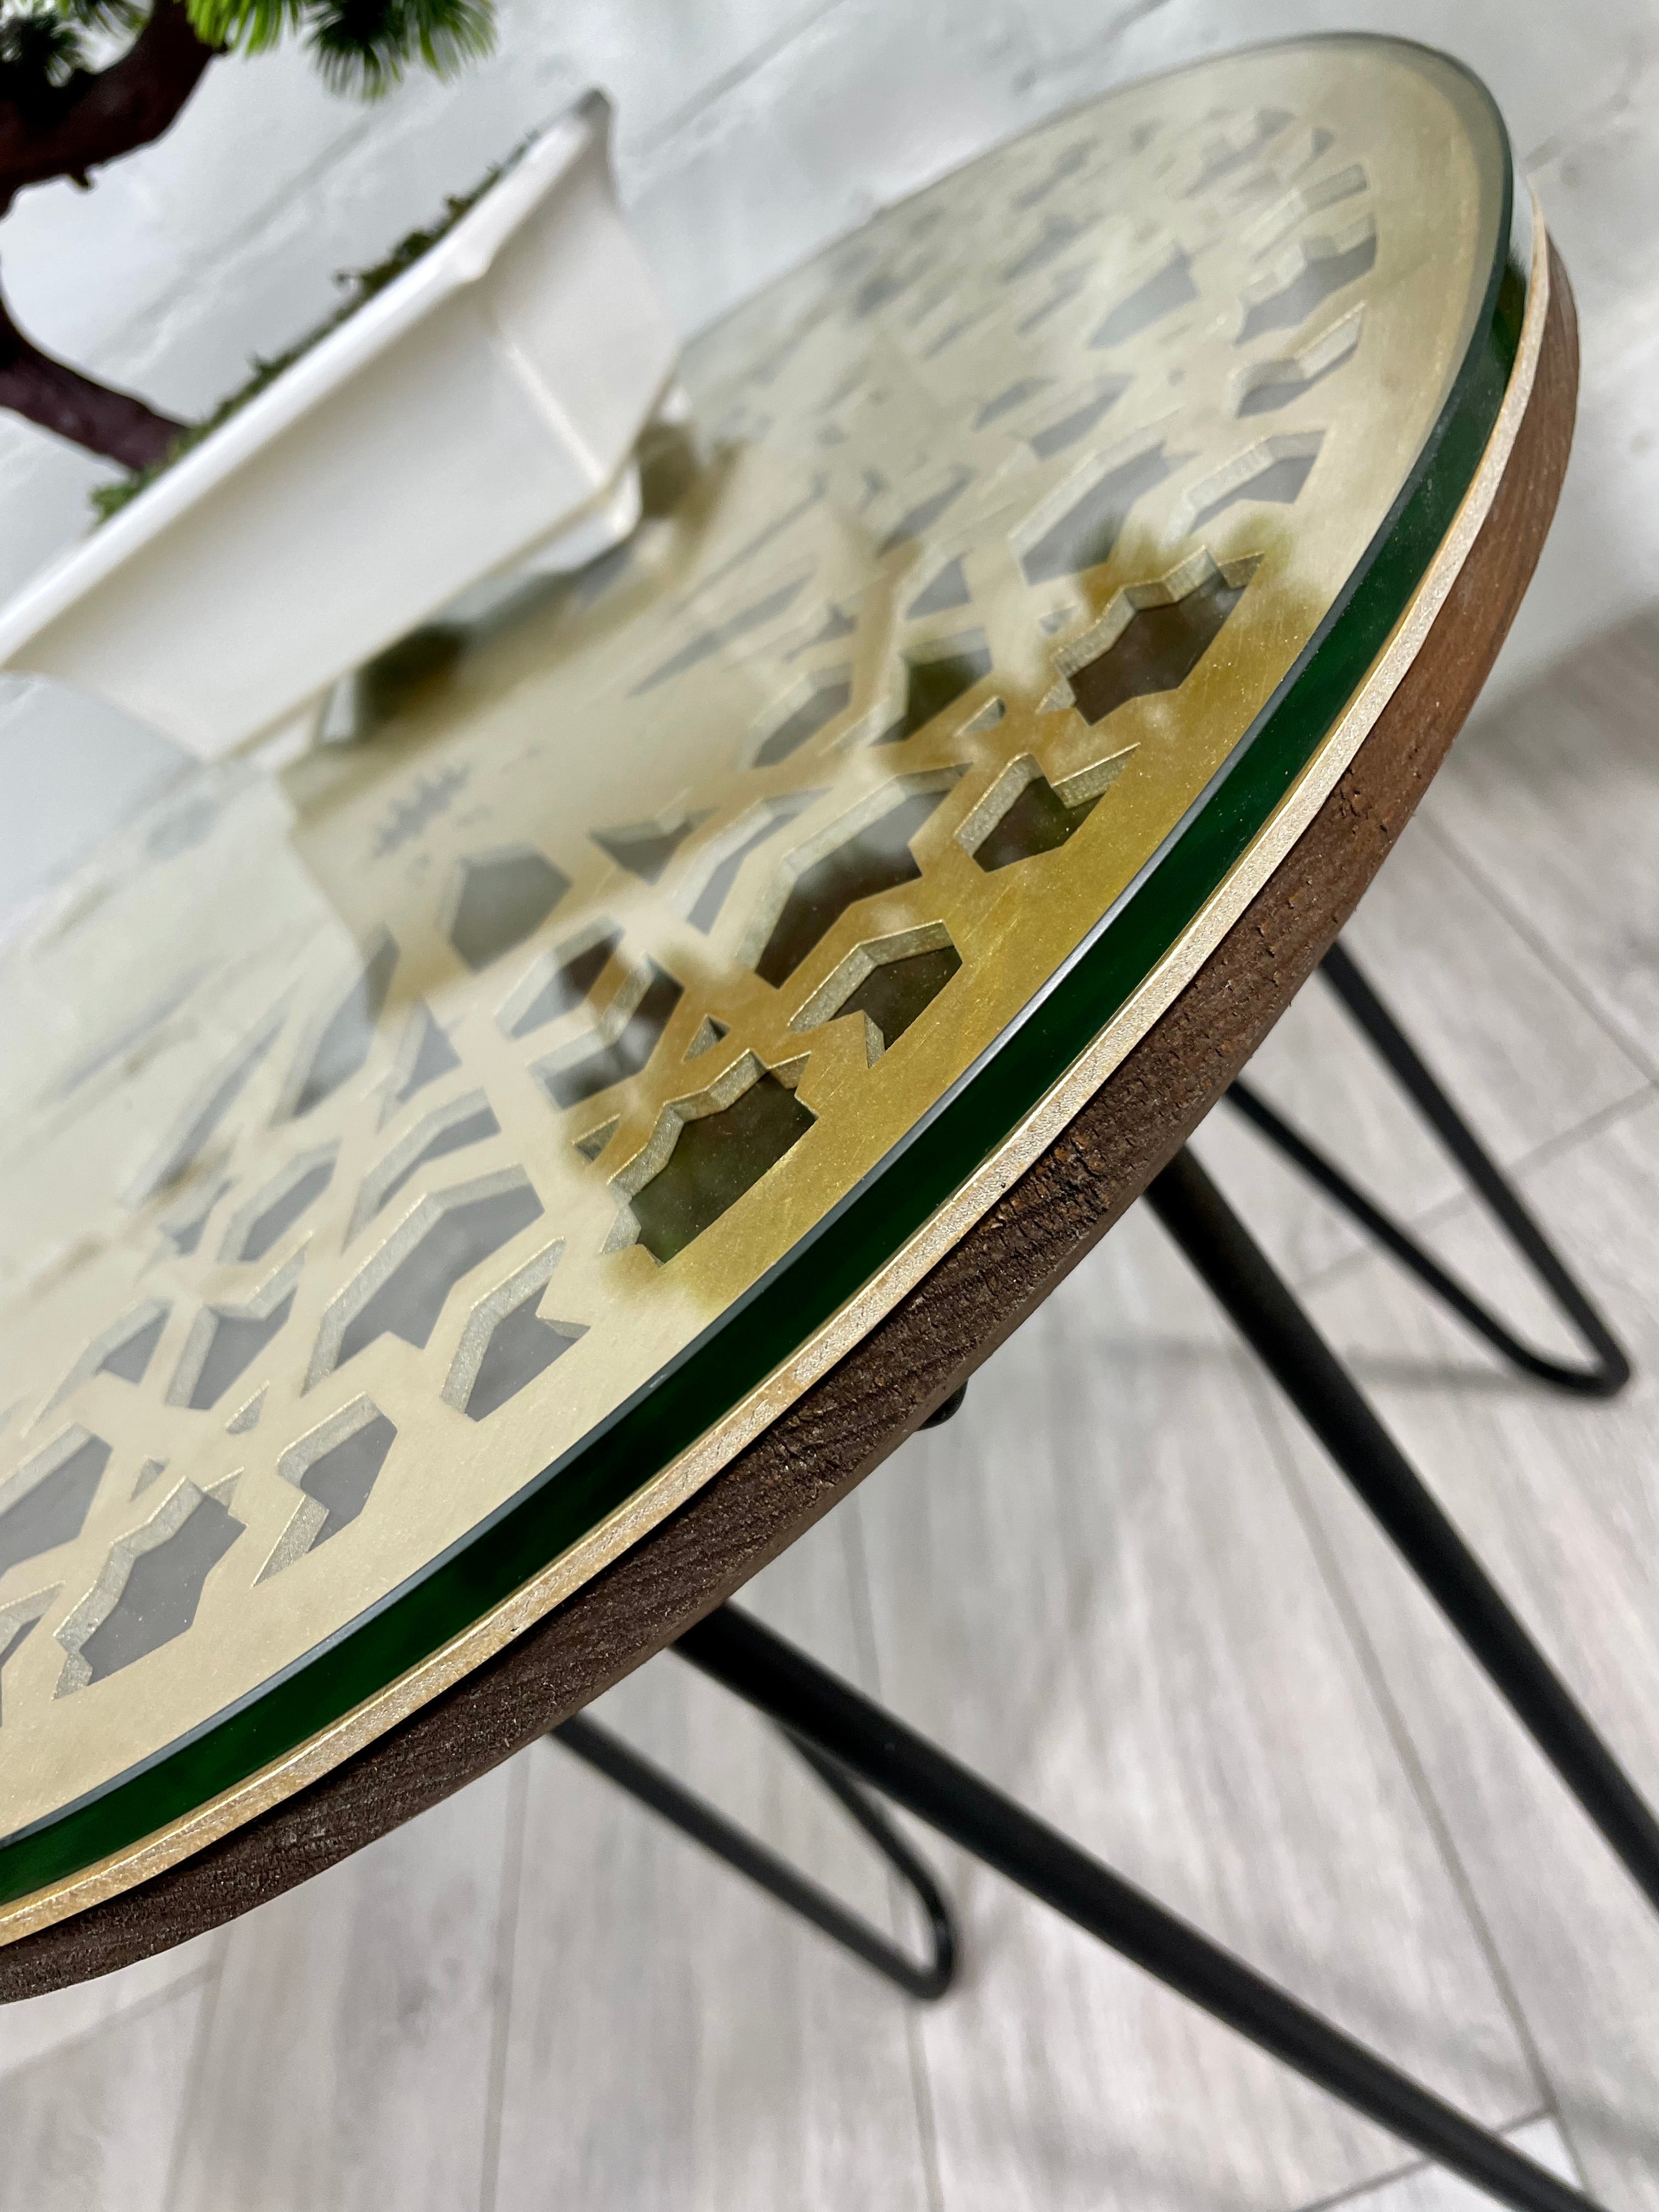 Moroccan Mosaic Side Table Pin Legs, Zellige Table Antique Gold and Walnut Wood Stain with Glass Top